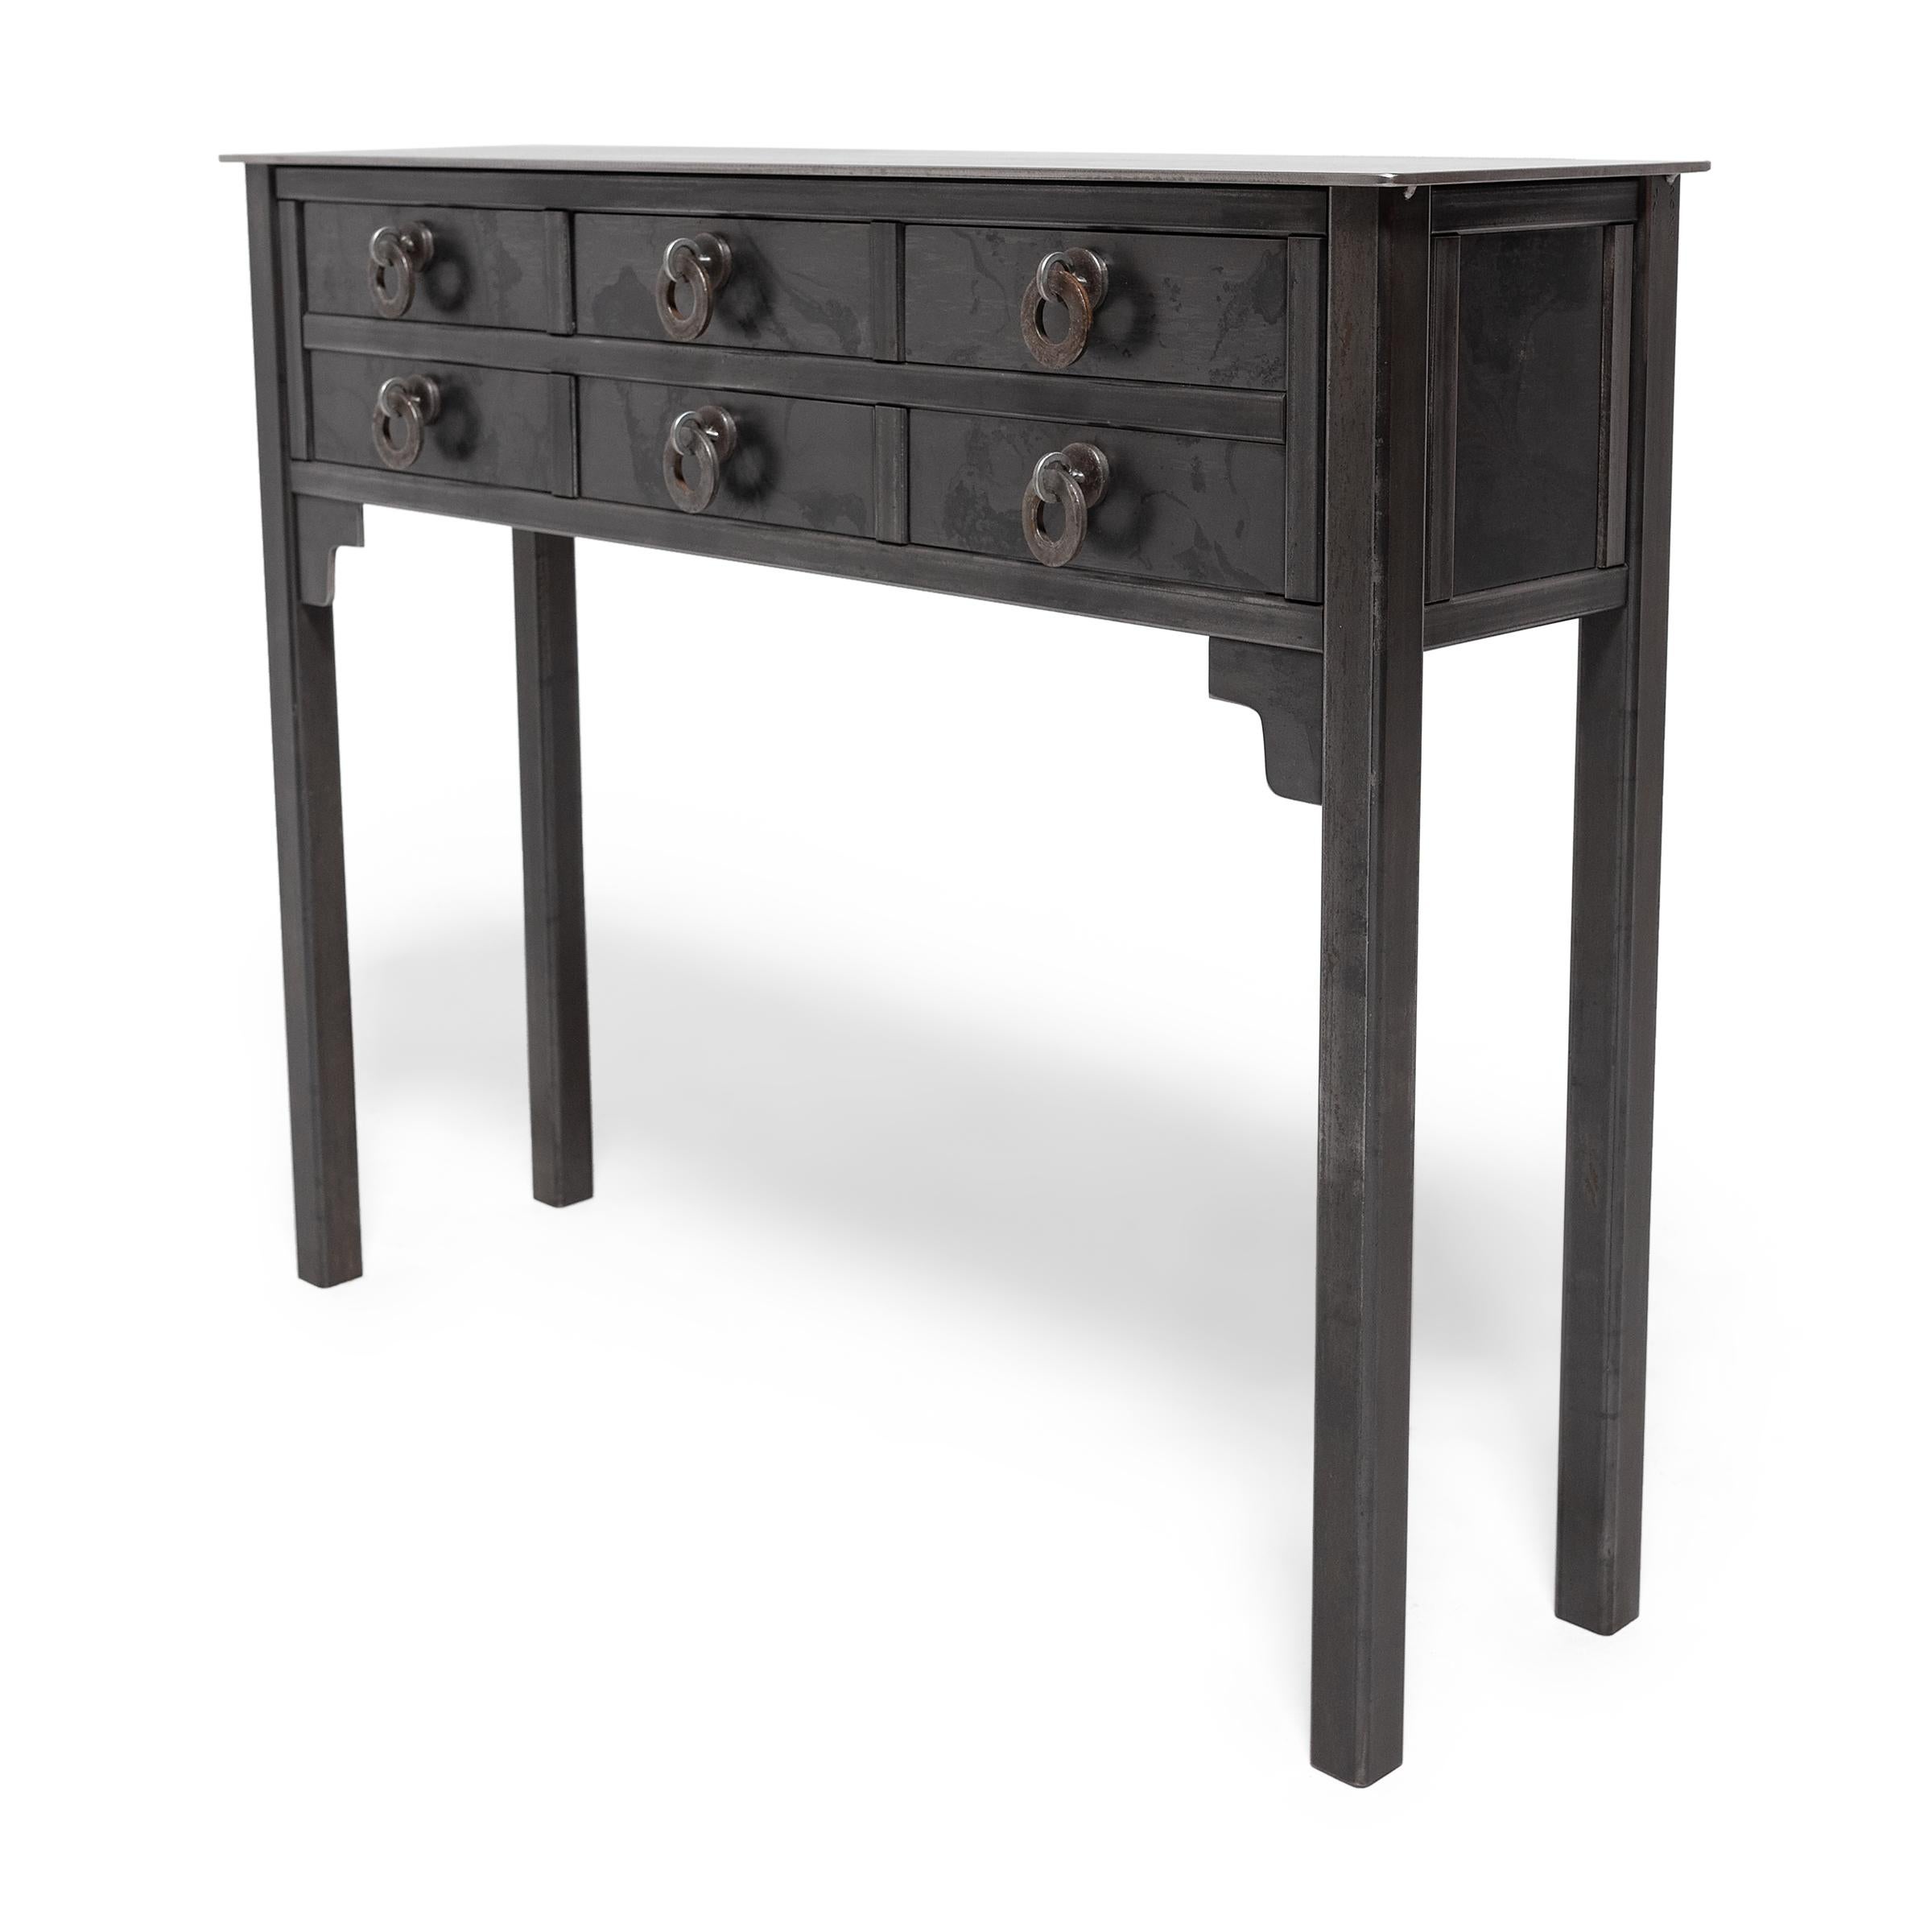 Created exclusively for Pagoda Red, the Ming Steel Collection by artist Jim Rose forges a connection between Shaker minimalism and the simplified lines of Ming-dynasty furniture. The culmination of years of studying the vernacular history of